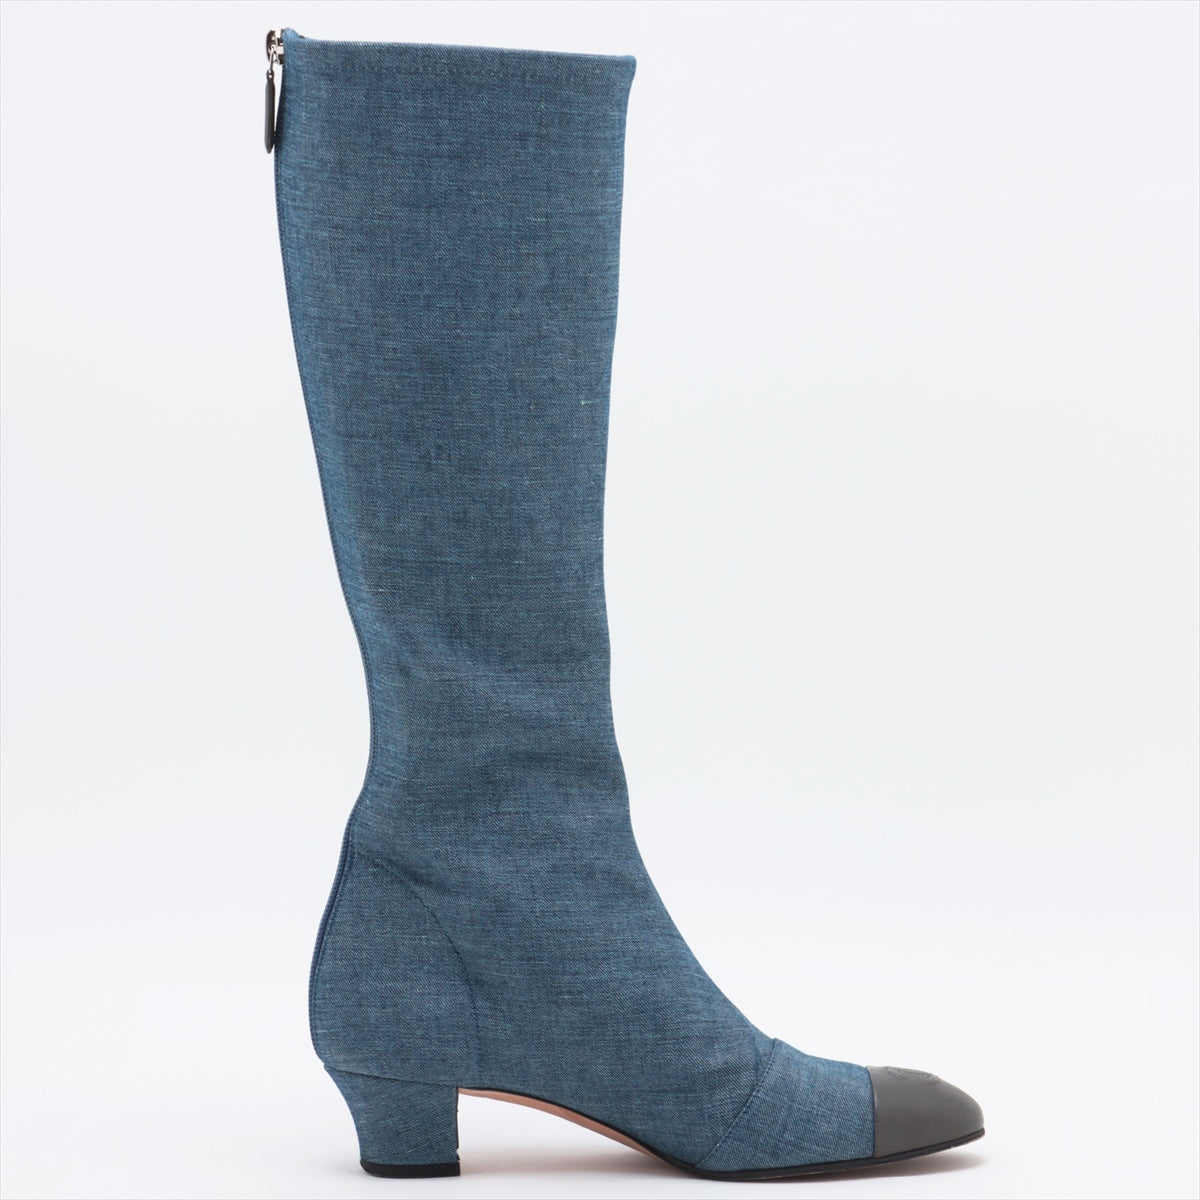 Chanel Coco Mark Denim & leather Long boots 36C Ladies' Navy blue There is a faint toe